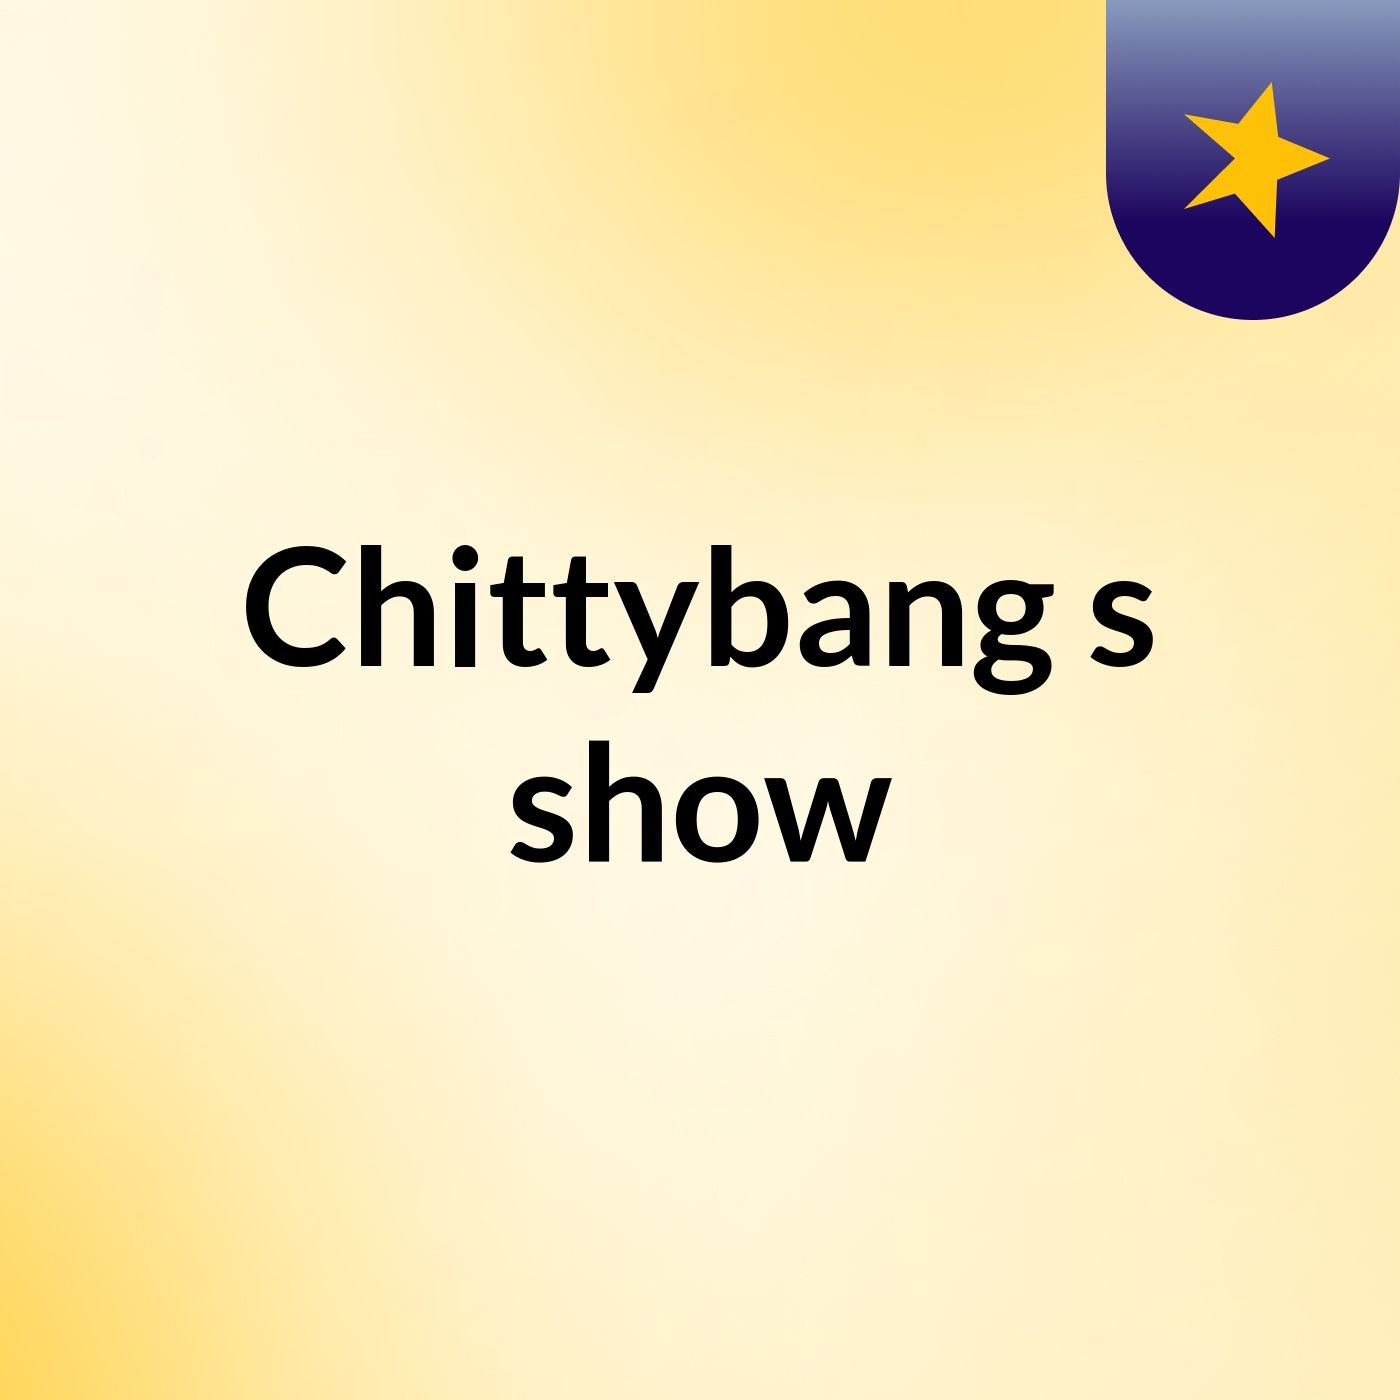 Chittybang's show